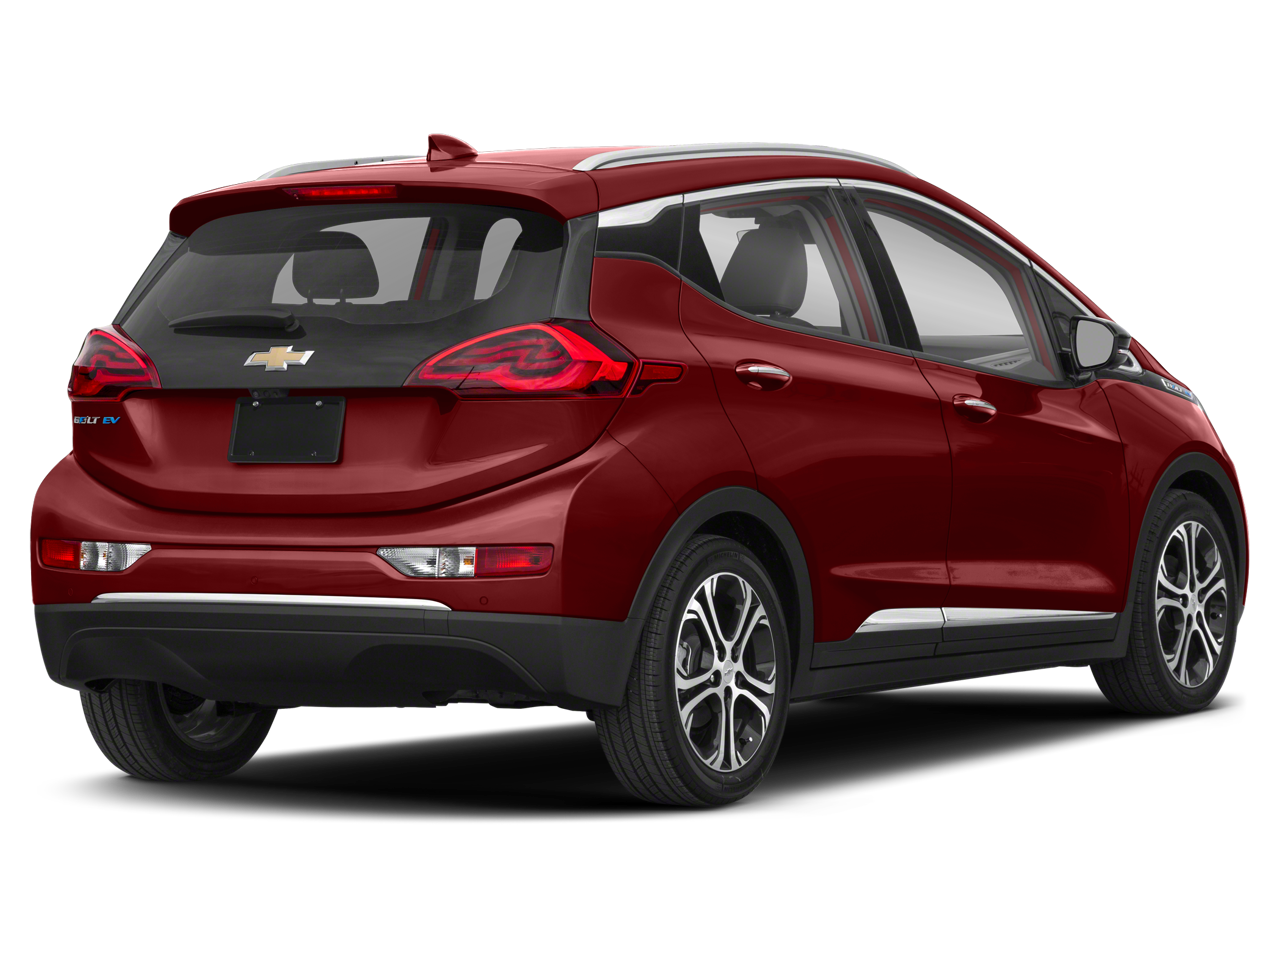 Used 2020 Chevrolet Bolt EV Premier with VIN 1G1FZ6S03L4113995 for sale in Greenville, OH